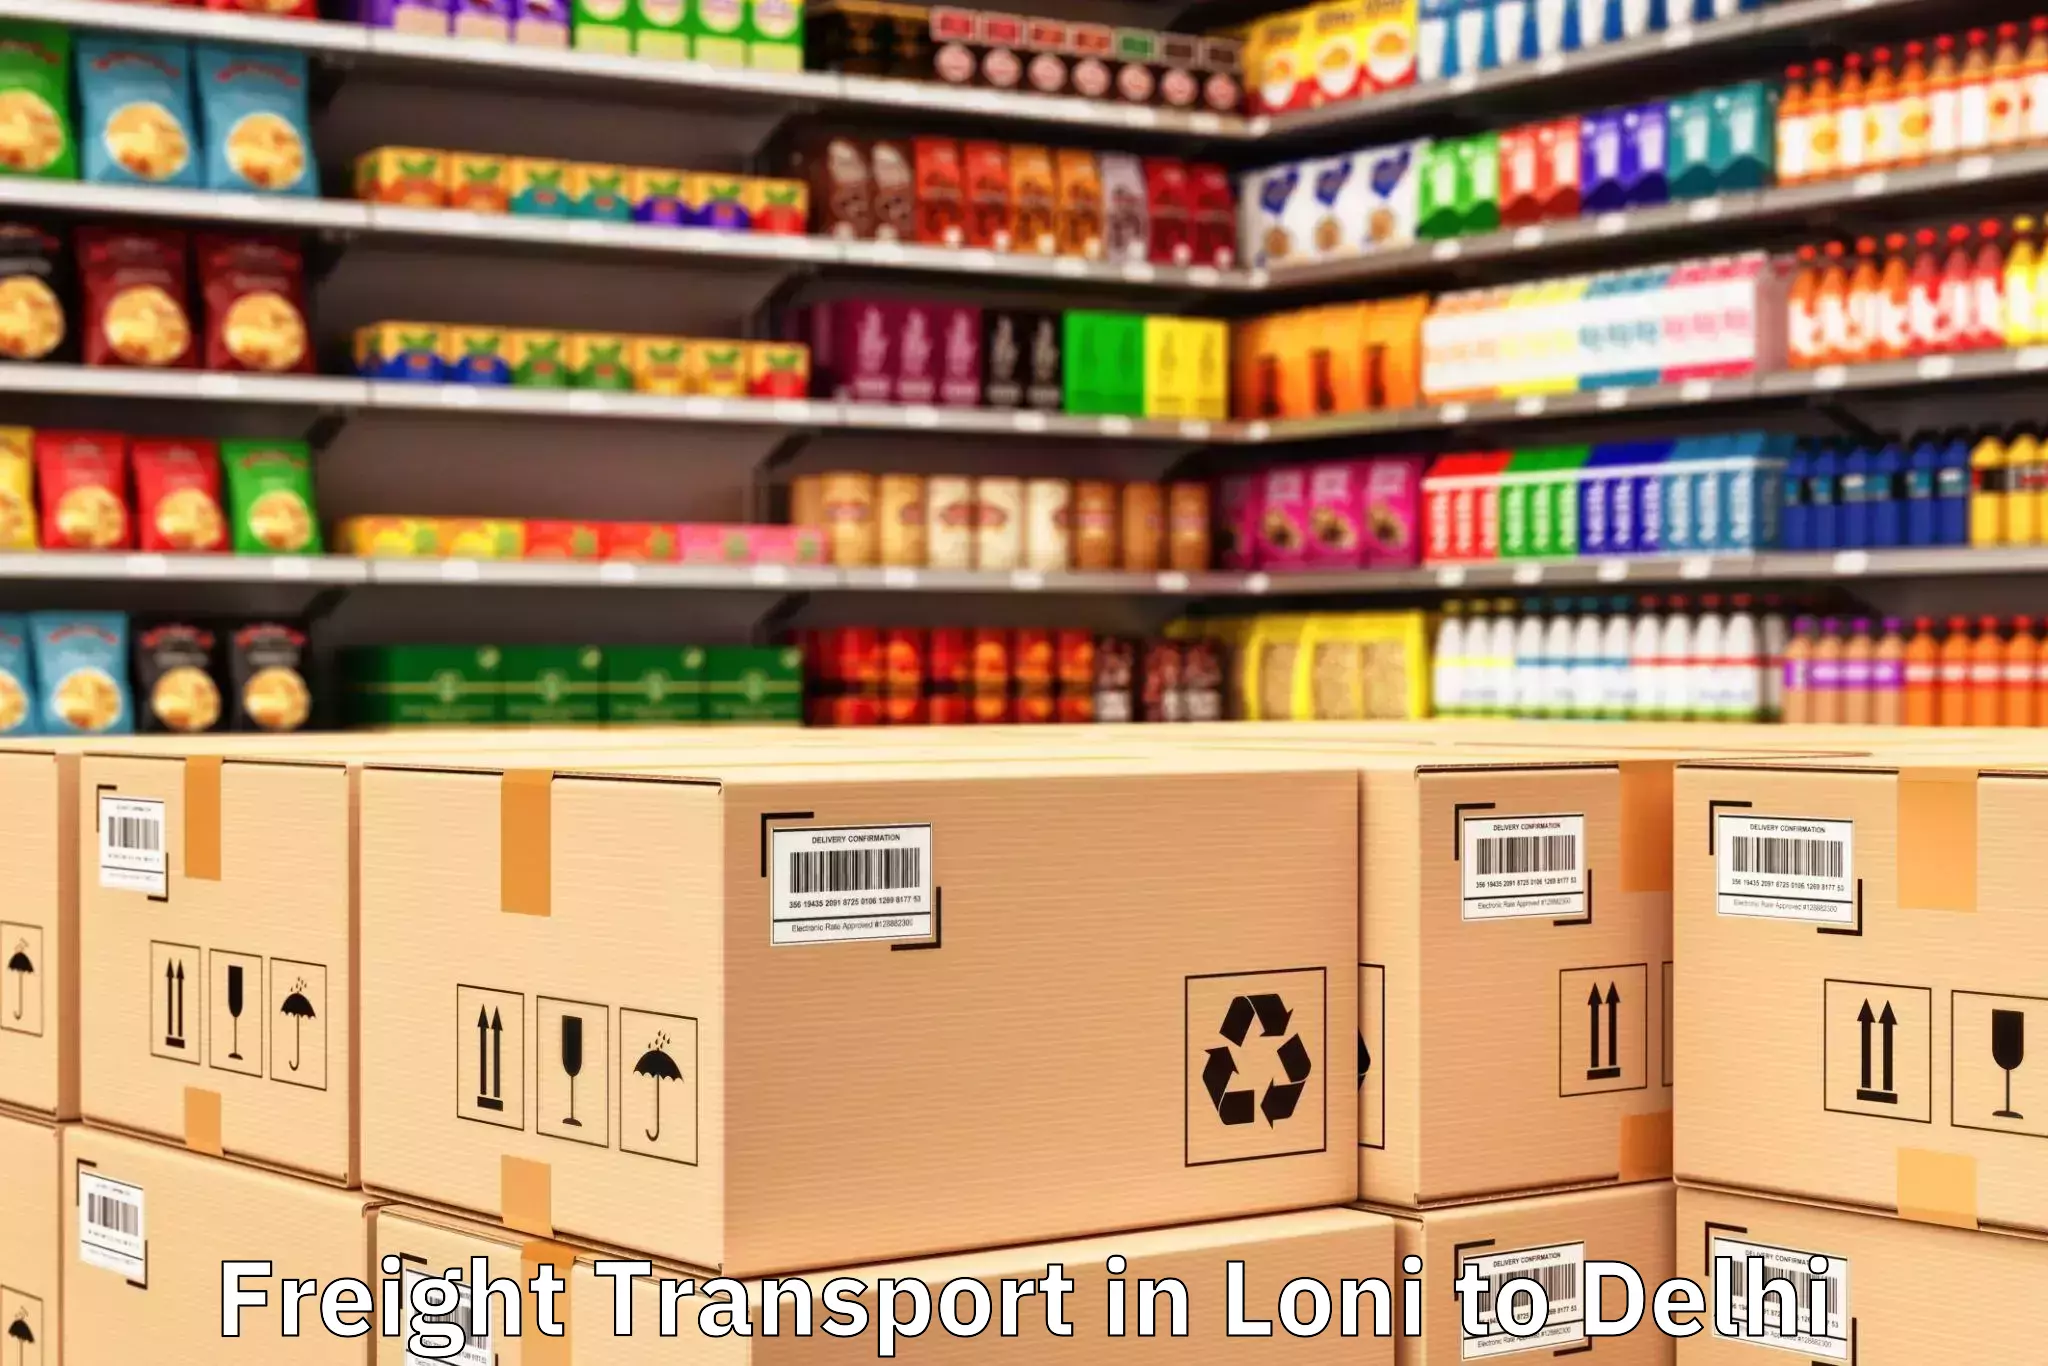 Easy Loni to The Chanakya Mall Freight Transport Booking